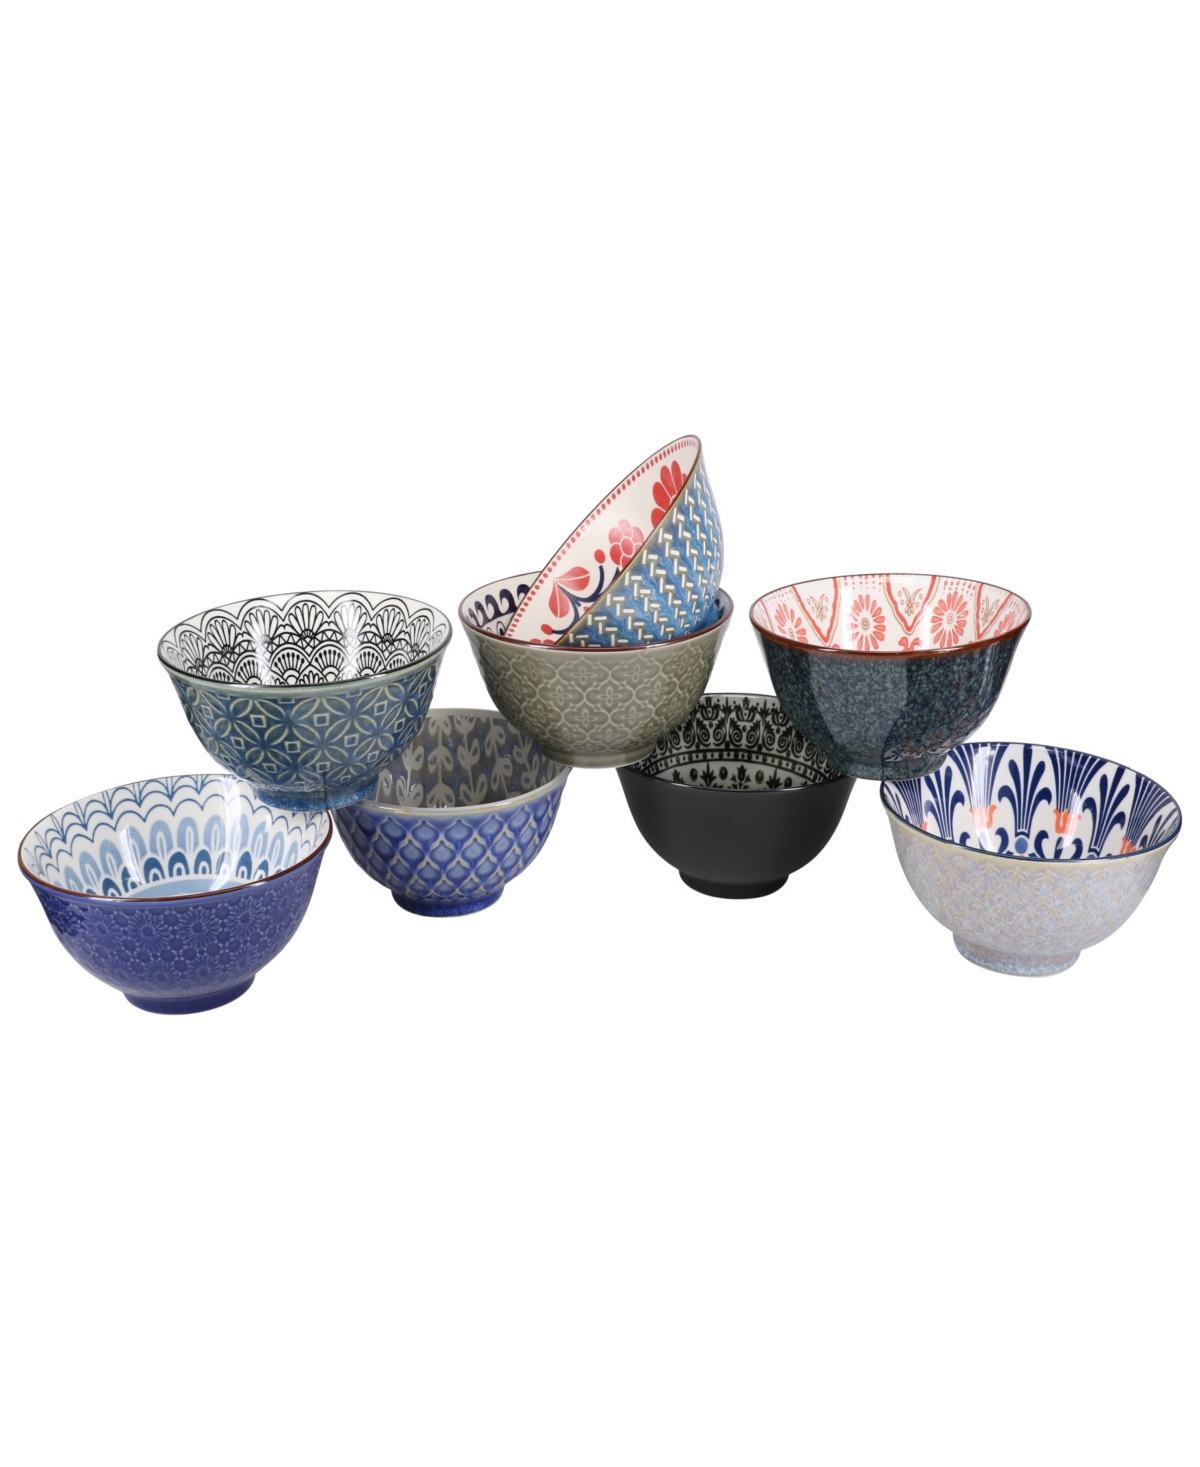 Ooh LaLa Mix and Match 23 Ounce Bowls, Set of 8 - Multi